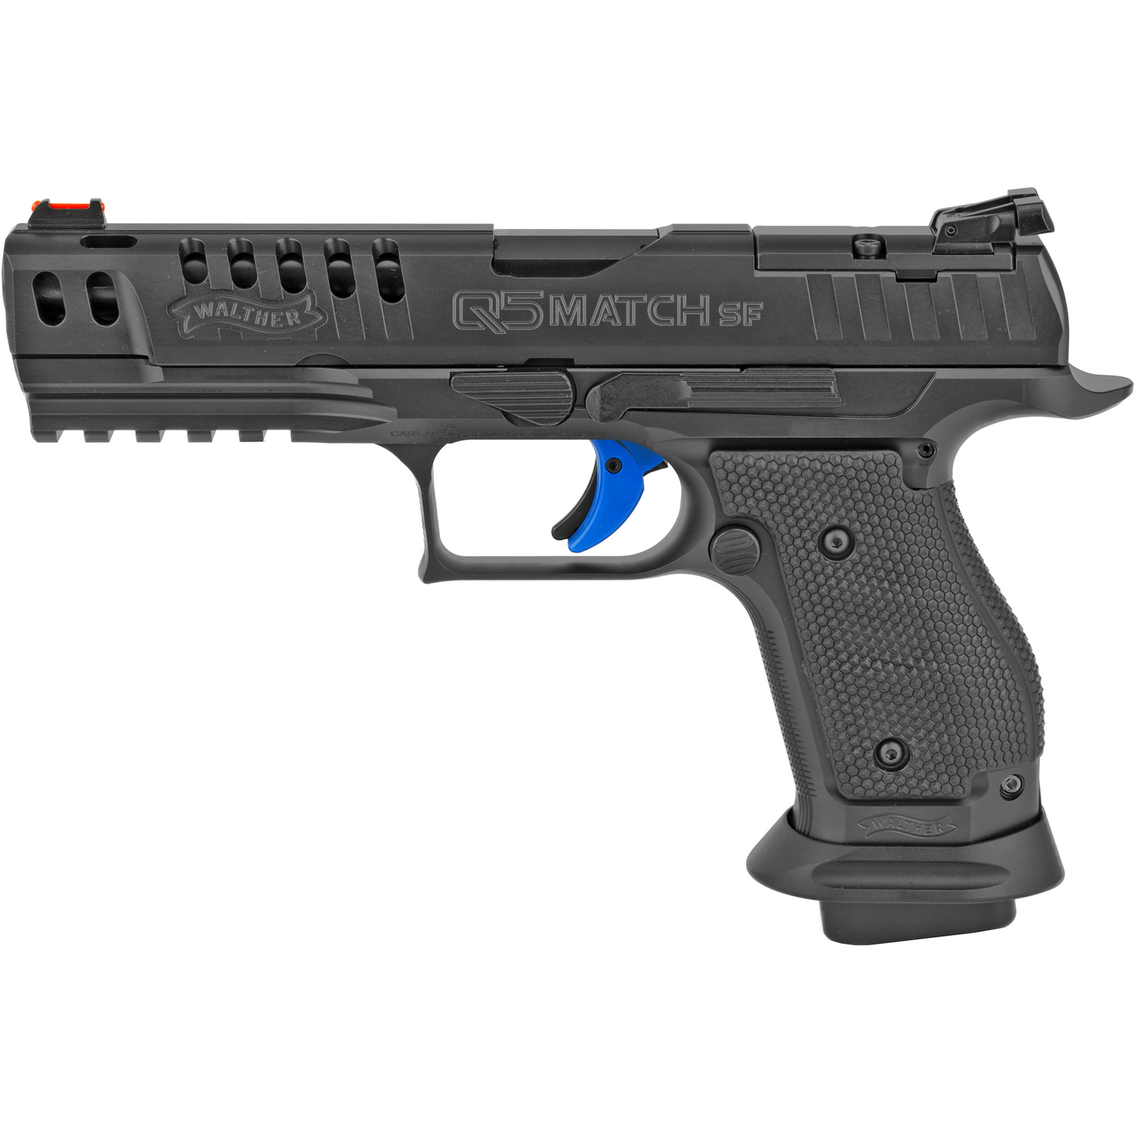 Walther PPQ Q5 Match Steel Frame Pro 9mm 5 in. Barrel Optic Ready 17 Rnd Pistol Blk - Image 2 of 3